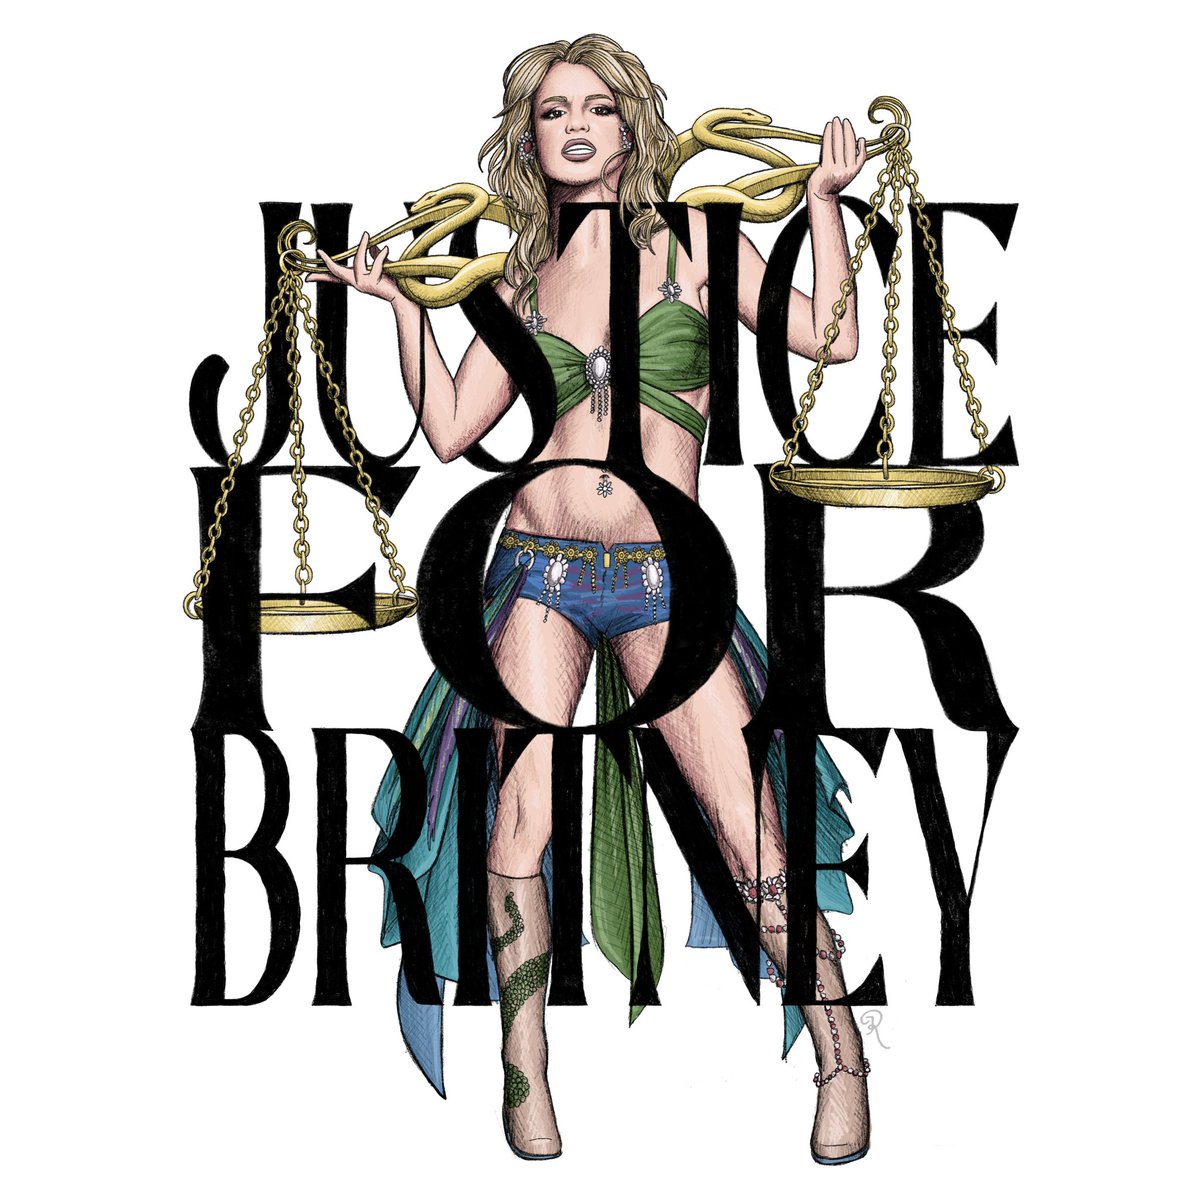 It’s not about the money. It’s about #JusticeForBritney ⚖️ #Justice4Britney #FreedBritney #FreeBritney  #Britney #BritneySpears #BritneyArmy #Justice #LadyJustice #ScalesOfJustice #ImASlave4U #Slave4U #DigitalArt #DigitalArtist #DigitalDrawing #DigitalIllustration  @britneyspears